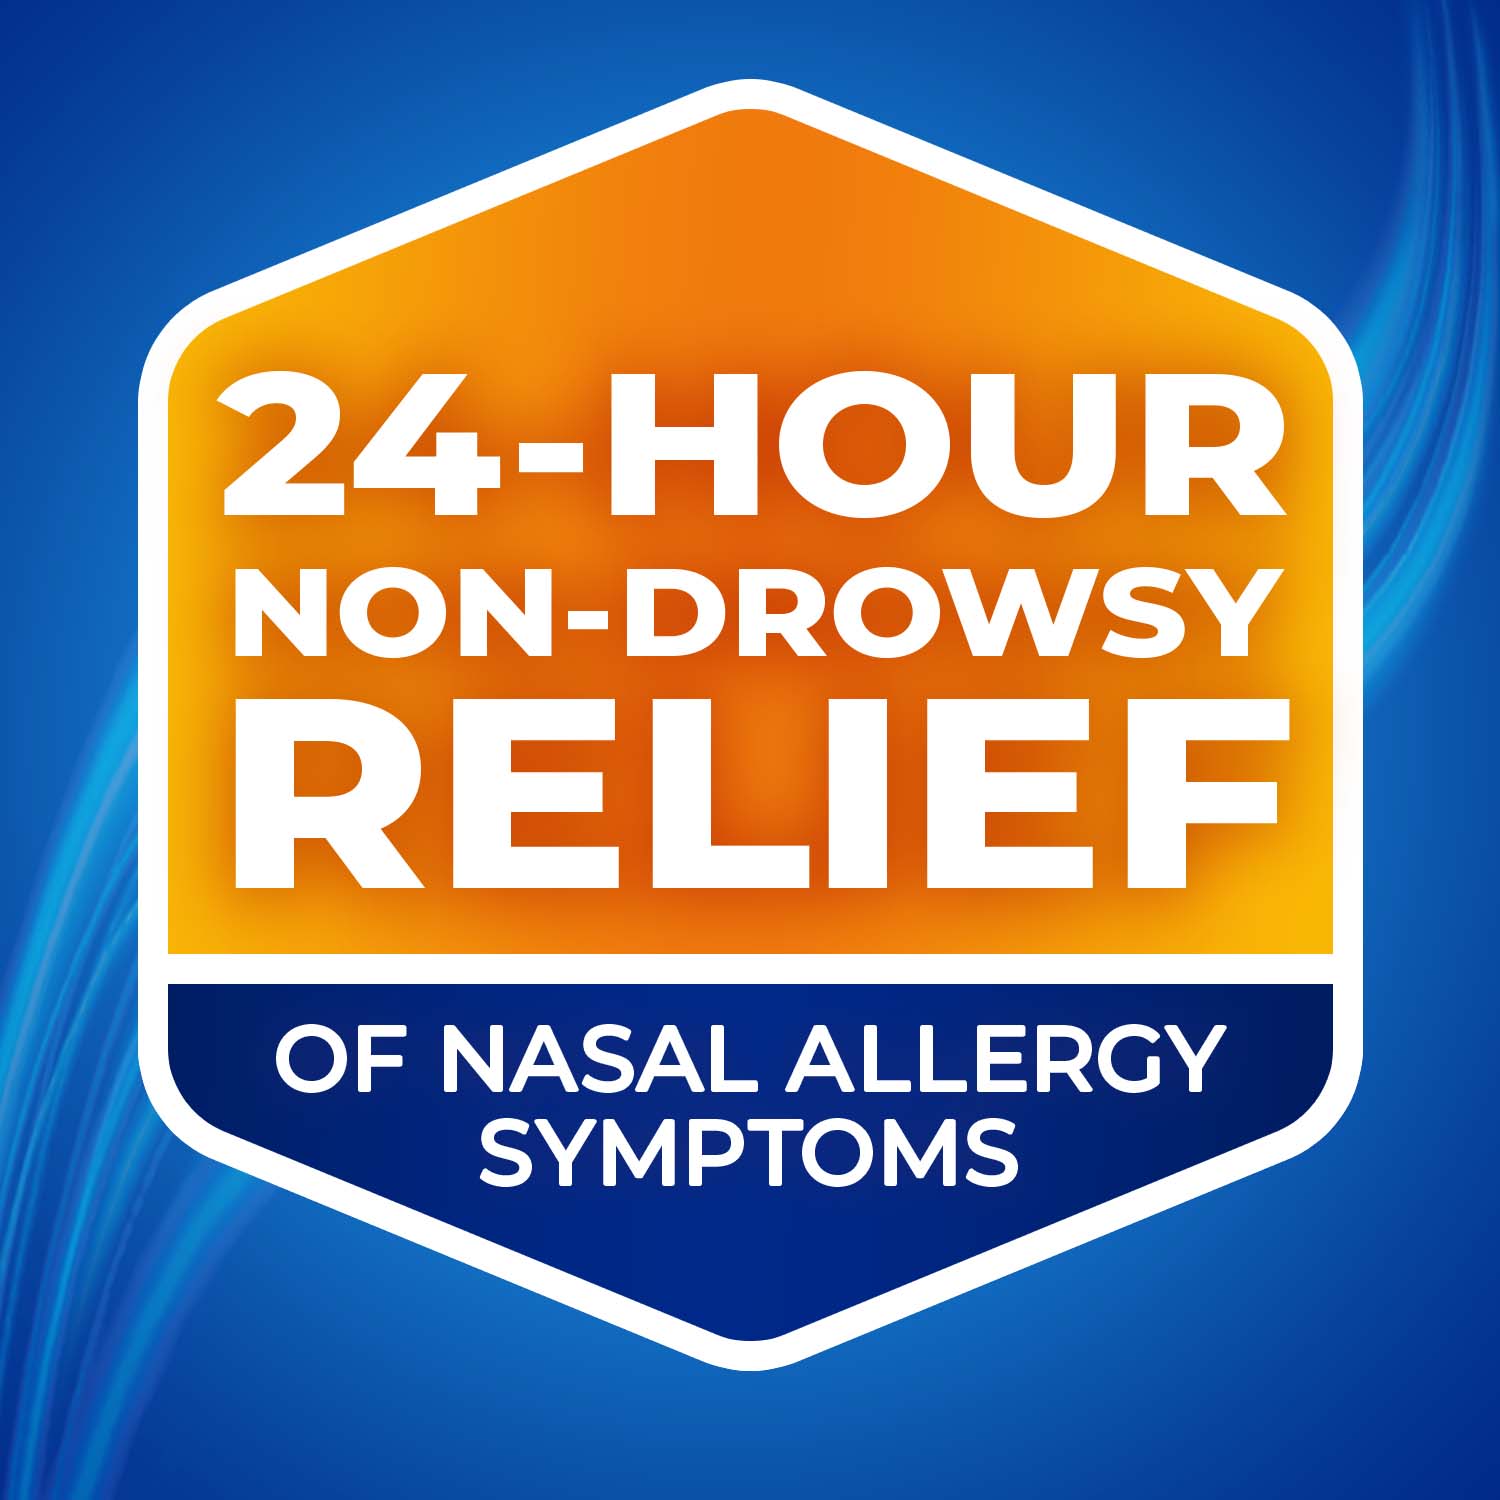 Nasacort 24HR Allergy Nasal Spray for Adults, Non-drowsy & Alcohol Free, 120 Sprays, 0.57 fl.oz. 2pk - image 3 of 9